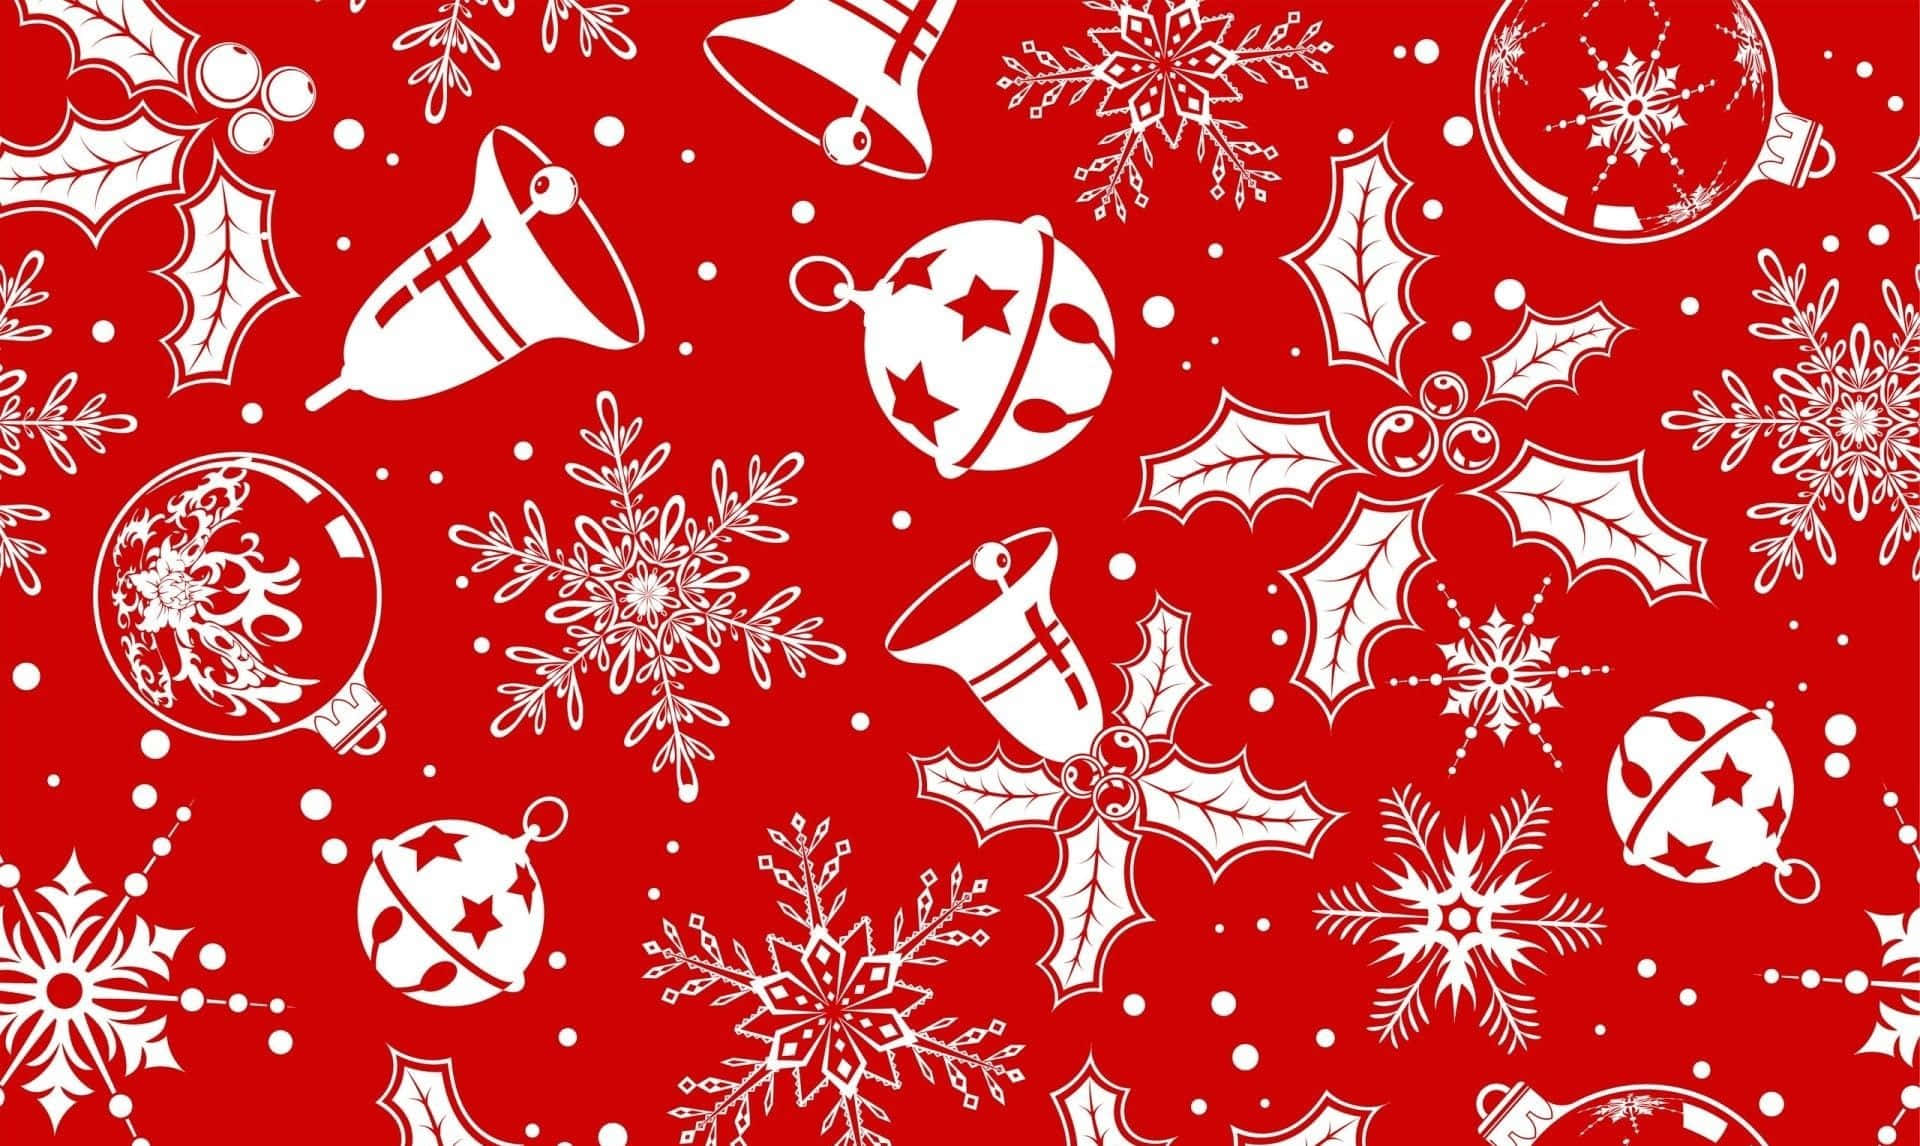 Celebrate the Holidays with Red Aesthetic Christmas Wallpaper